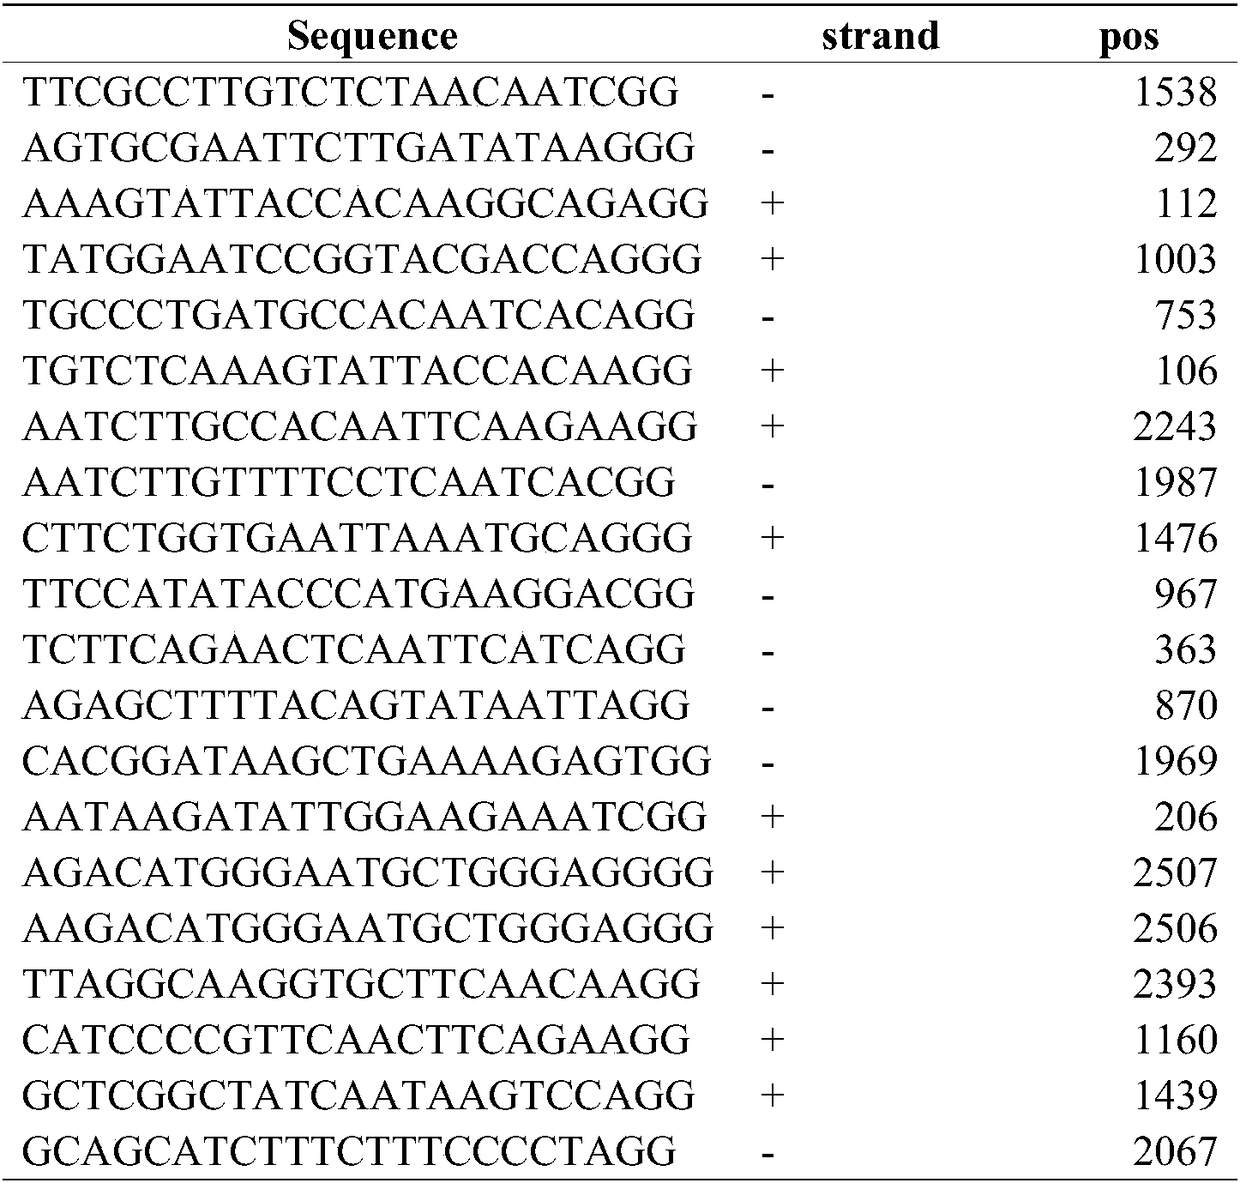 Method of breeding mung bean sterile mutant based on CRISPR/Cas9 gene editing technology and special gRNA